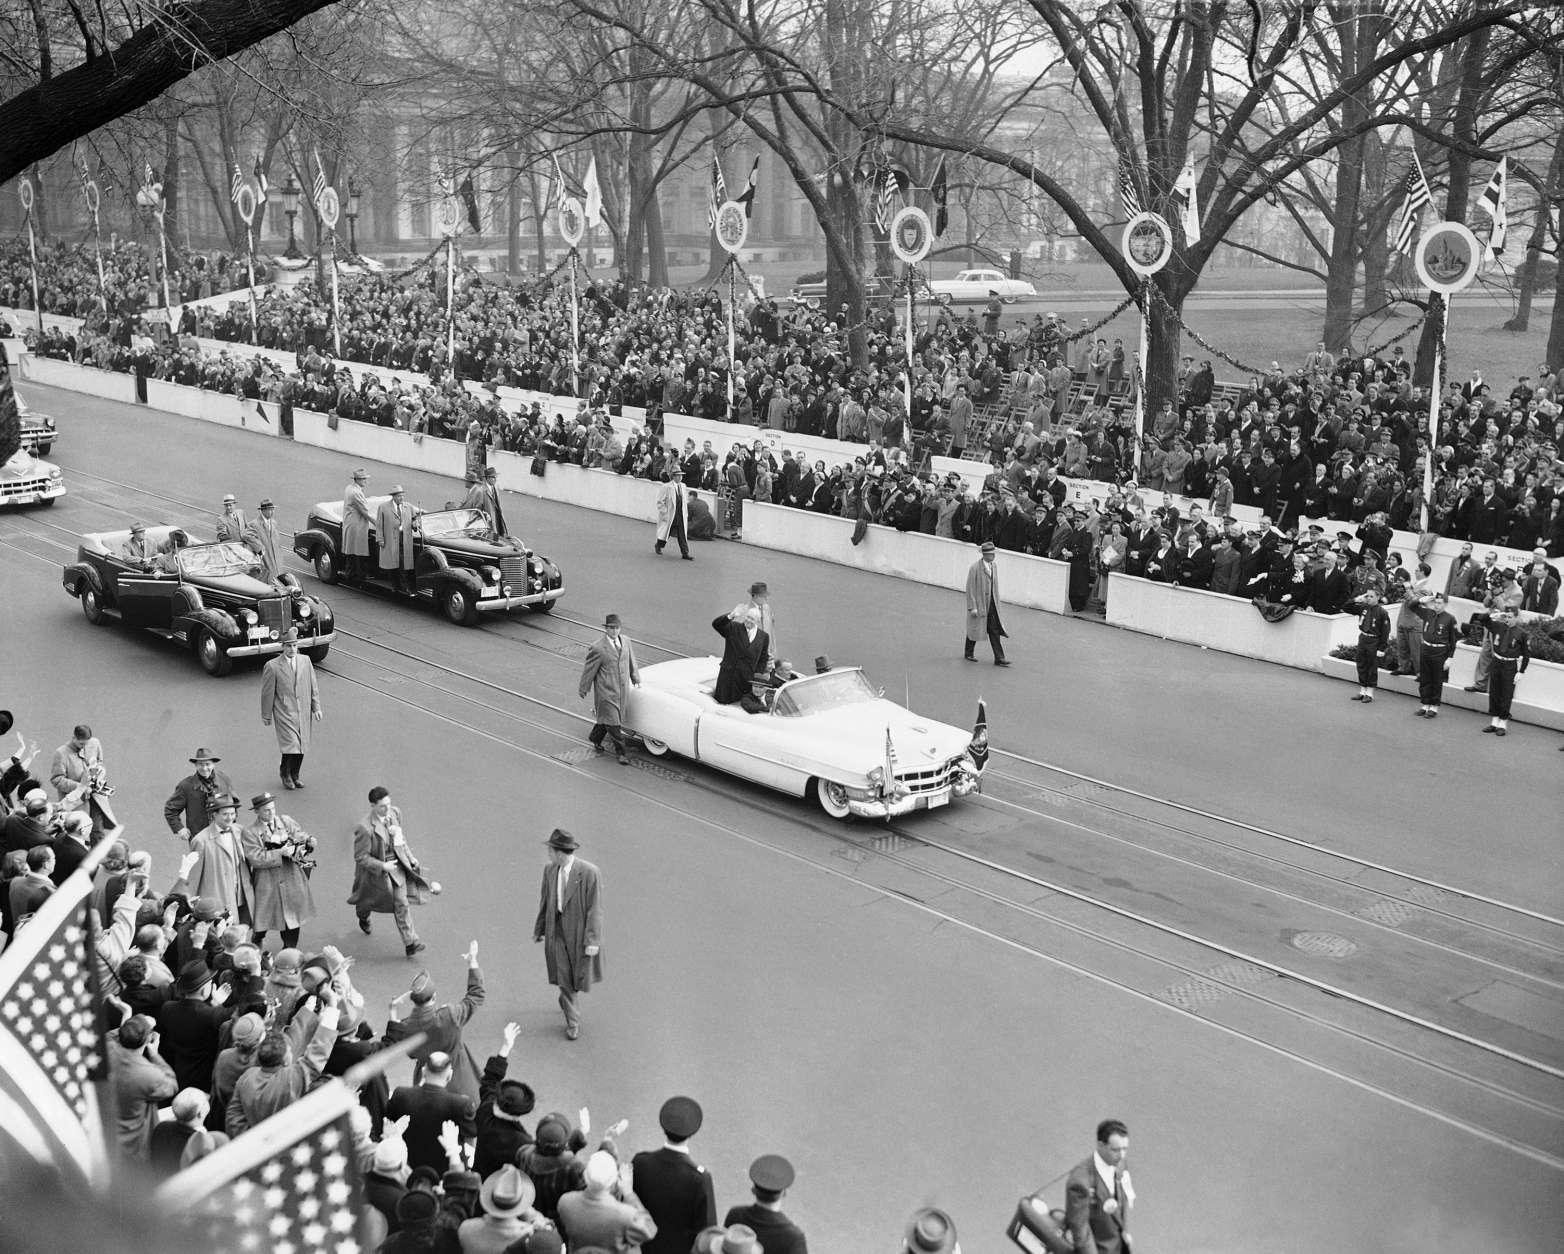 President Dwight Eisenhower, in his open car, waves to cheering spectators as he approaches the White House where he went into reviewing stand to watch the inaugural parade in Washington, Jan. 20, 1953. Crowds line Pennsylvania Avenue sidewalk. (AP Photo)